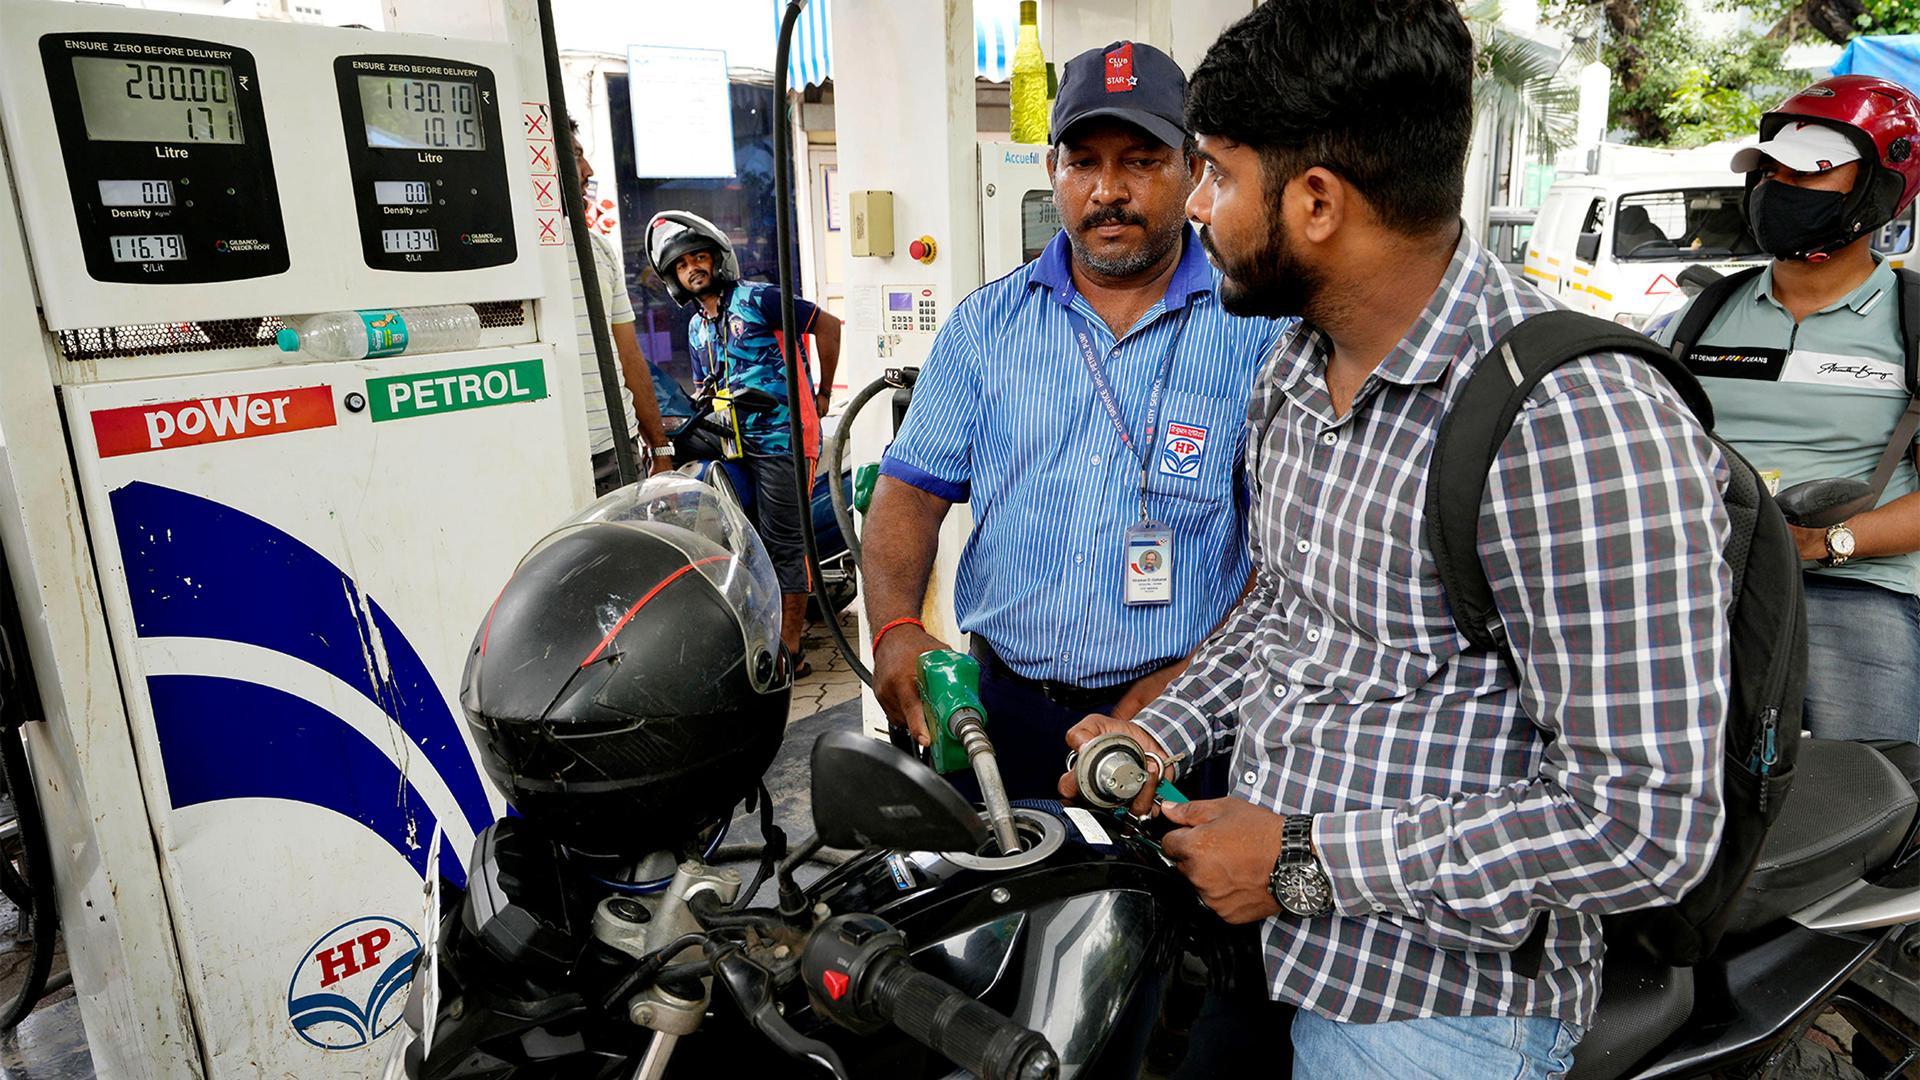 A motorcyclists watches as an employee of a fuel stationin fills petrol, in Mumbai, India